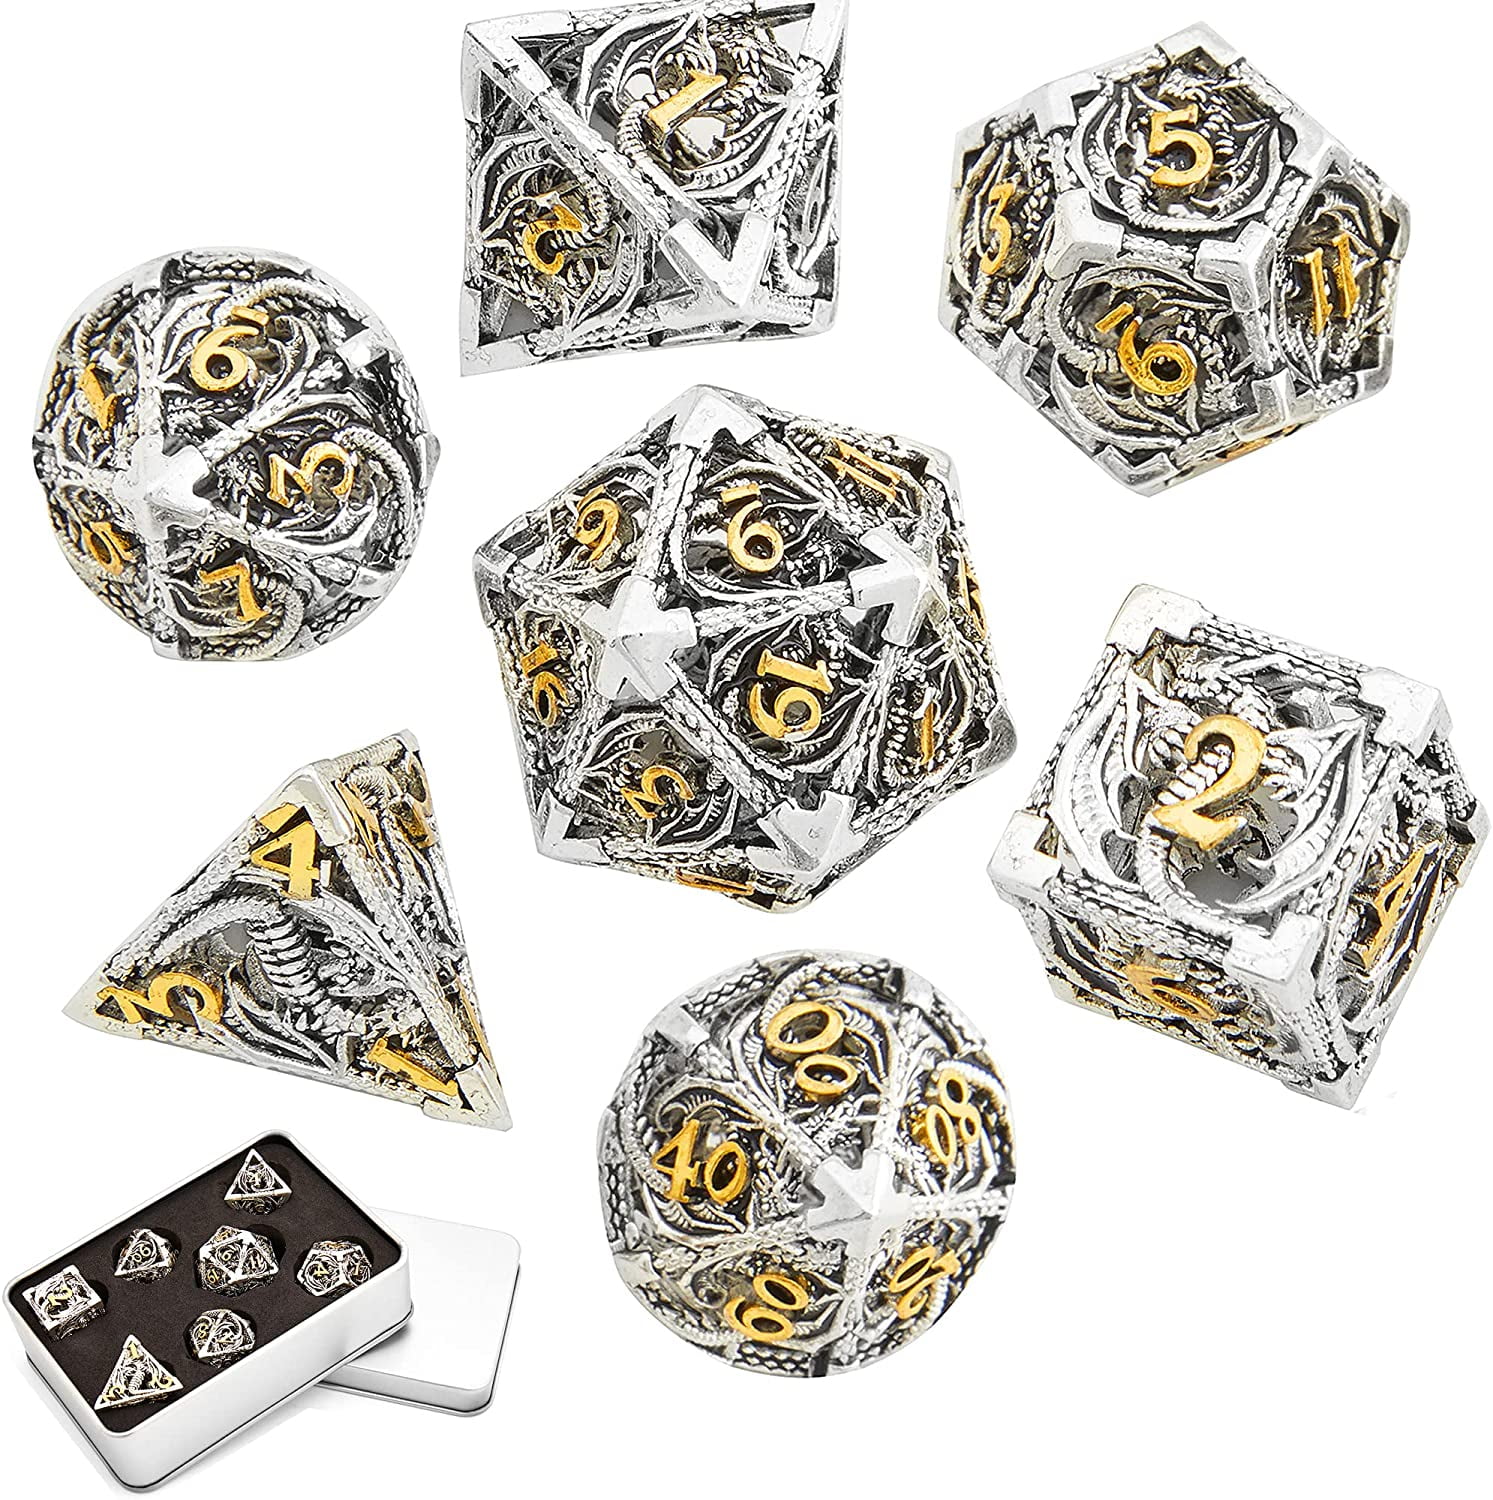 with Metal Case Hollow Metal DND Game Dice Skulls Ancient Bloodstain 7Pcs Set for Dungeons and Dragons RPG MTG Table Games D&D Pathfinder Shadowrun and Math Teaching 